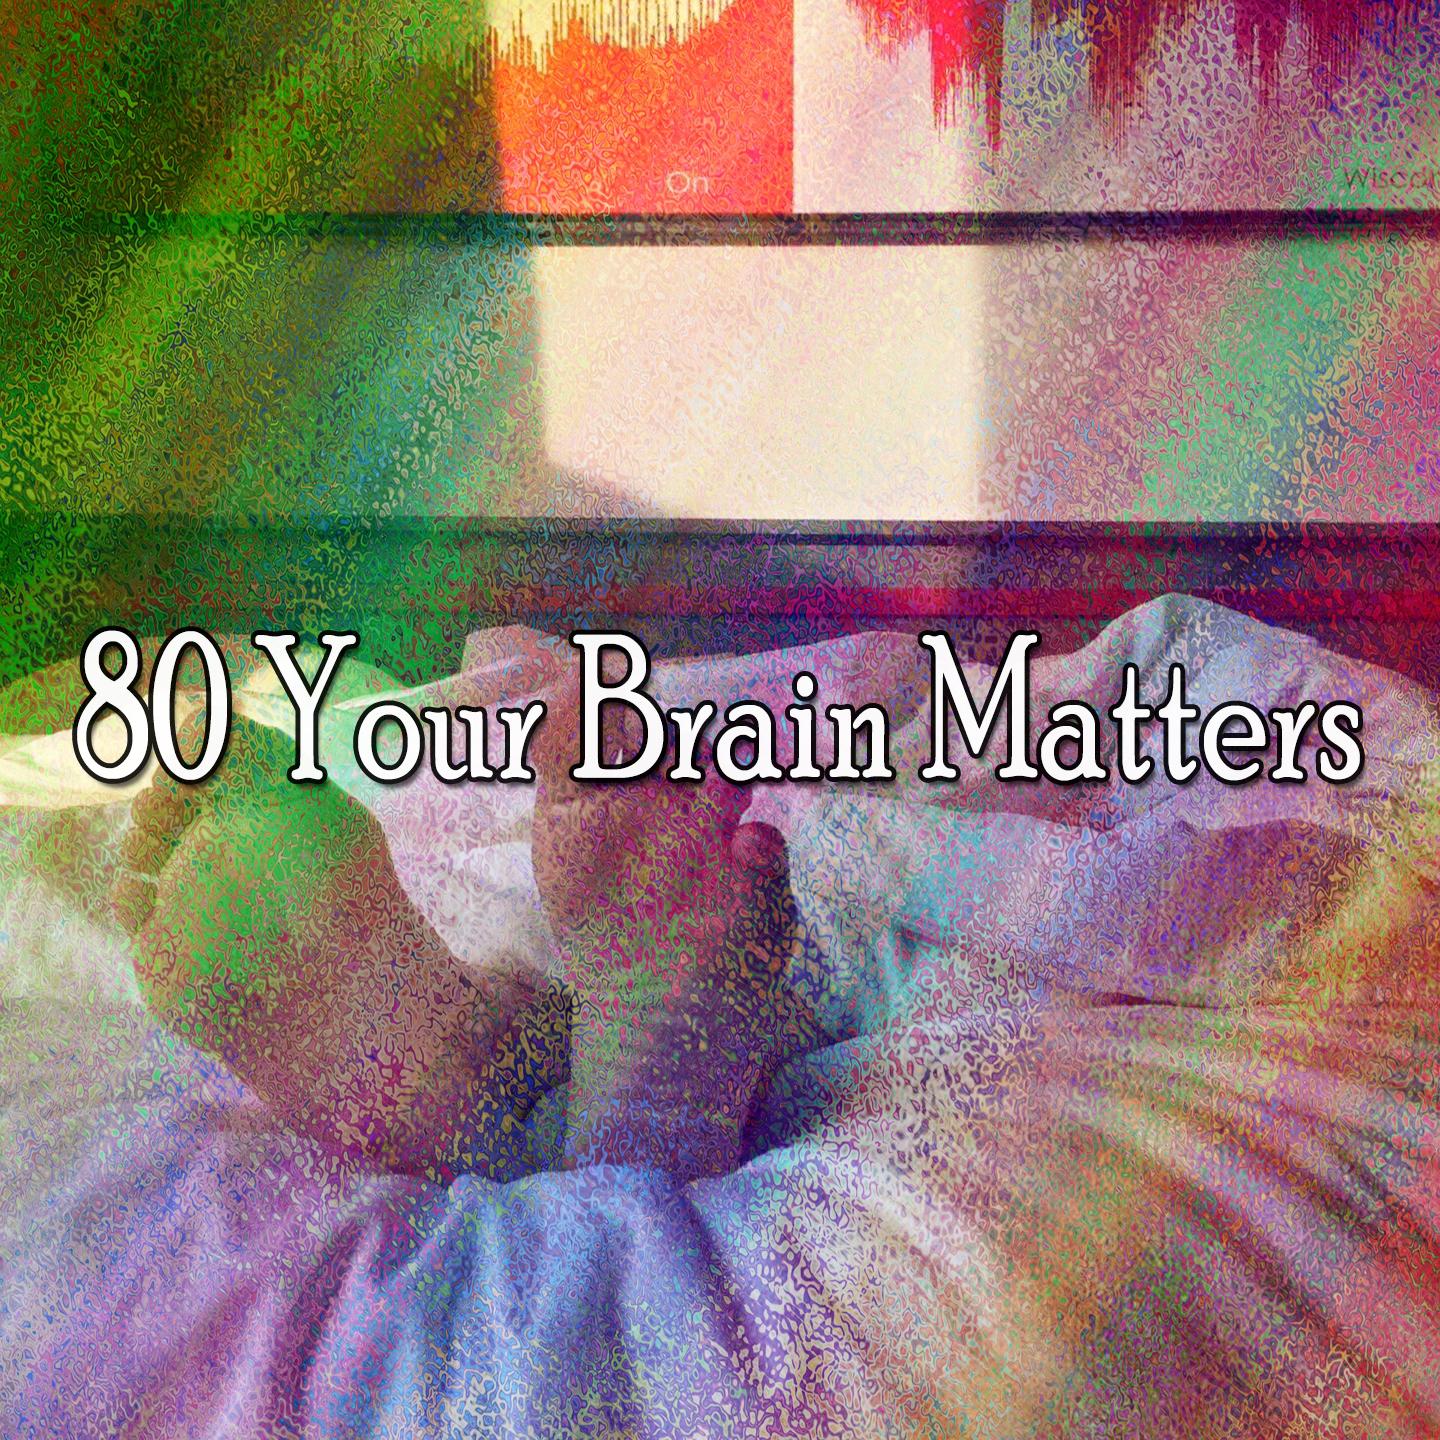 80 Your Brain Matters